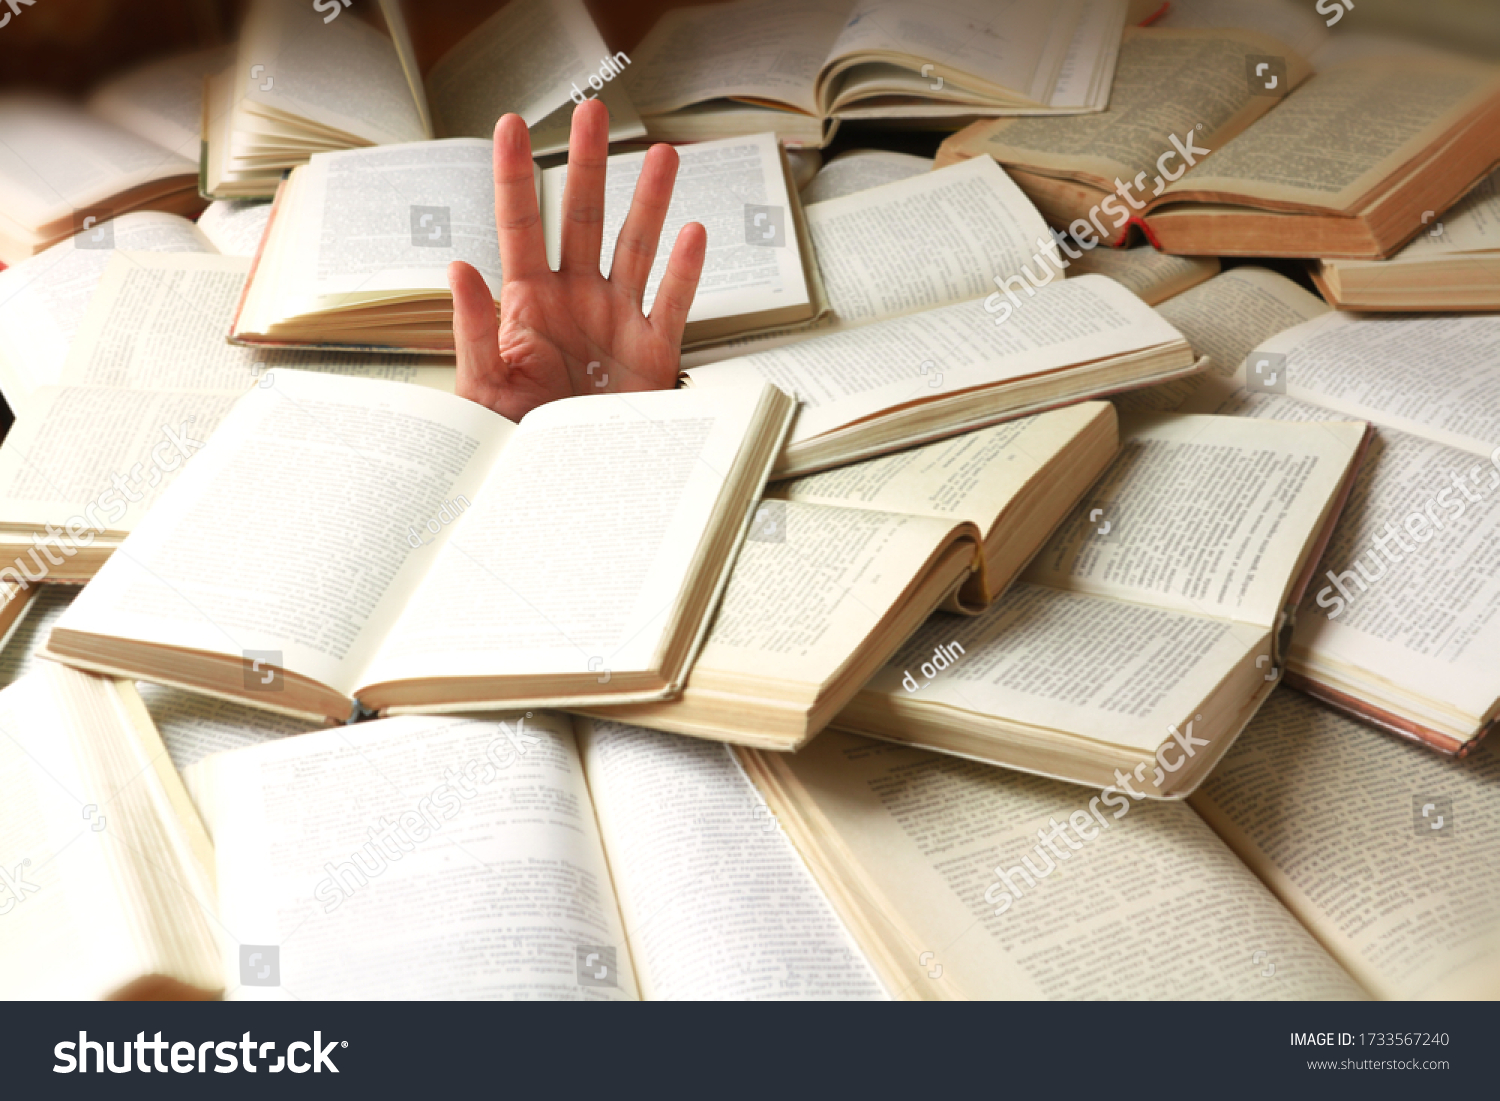 A student or reader drowned in a mountain of books. Man's hand sticks out from the rubble of open books. Concept - preparing for exams or excess information. Selective focus. #1733567240